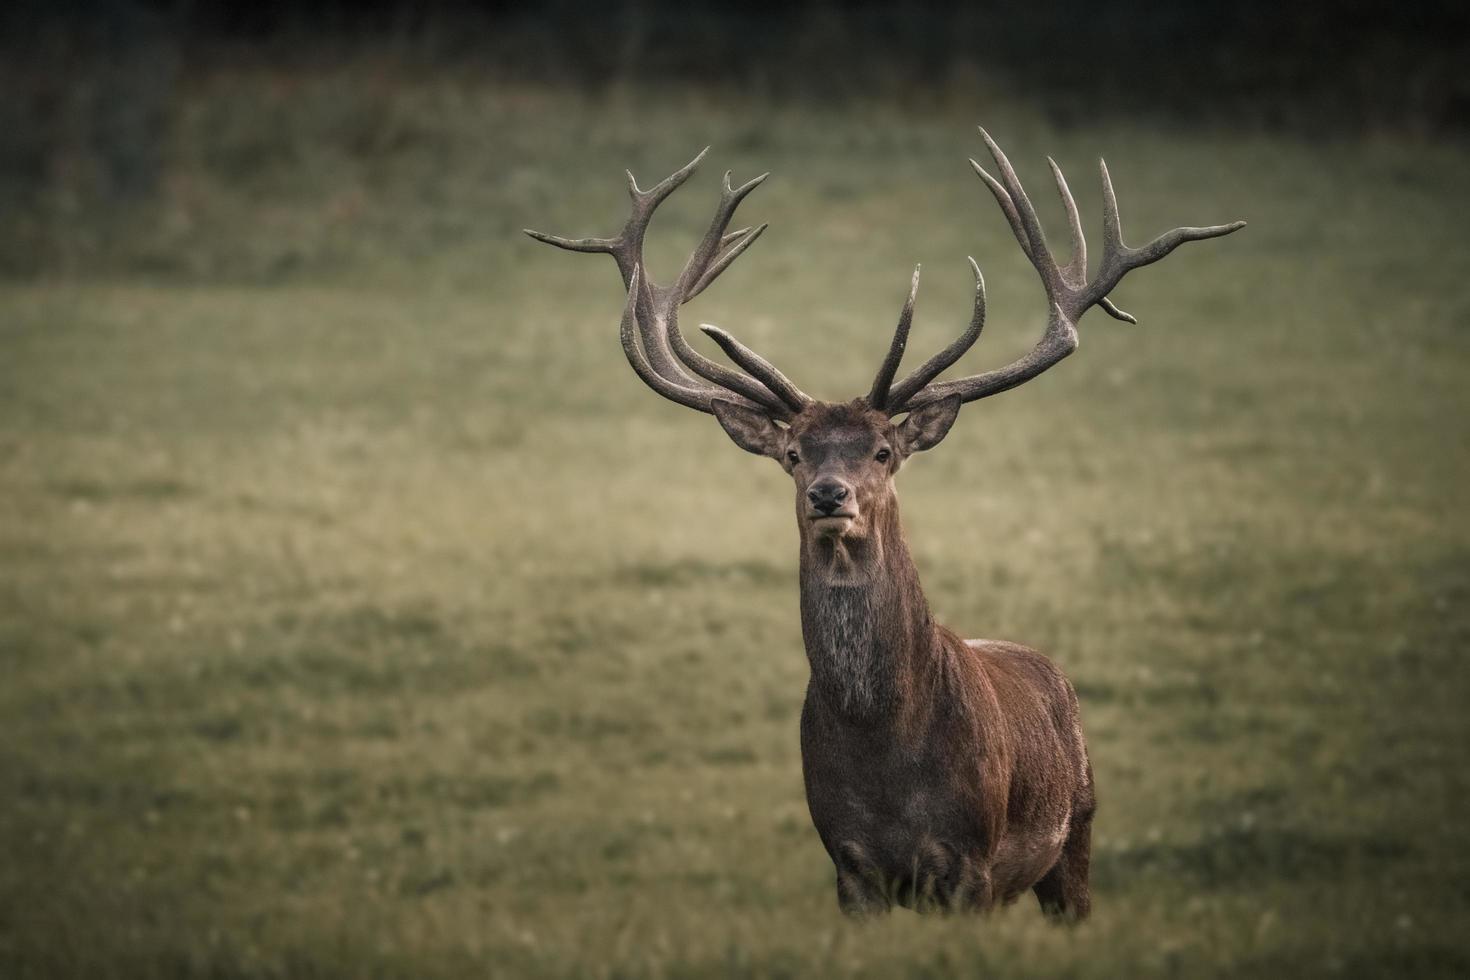 Deer with large antlers photo